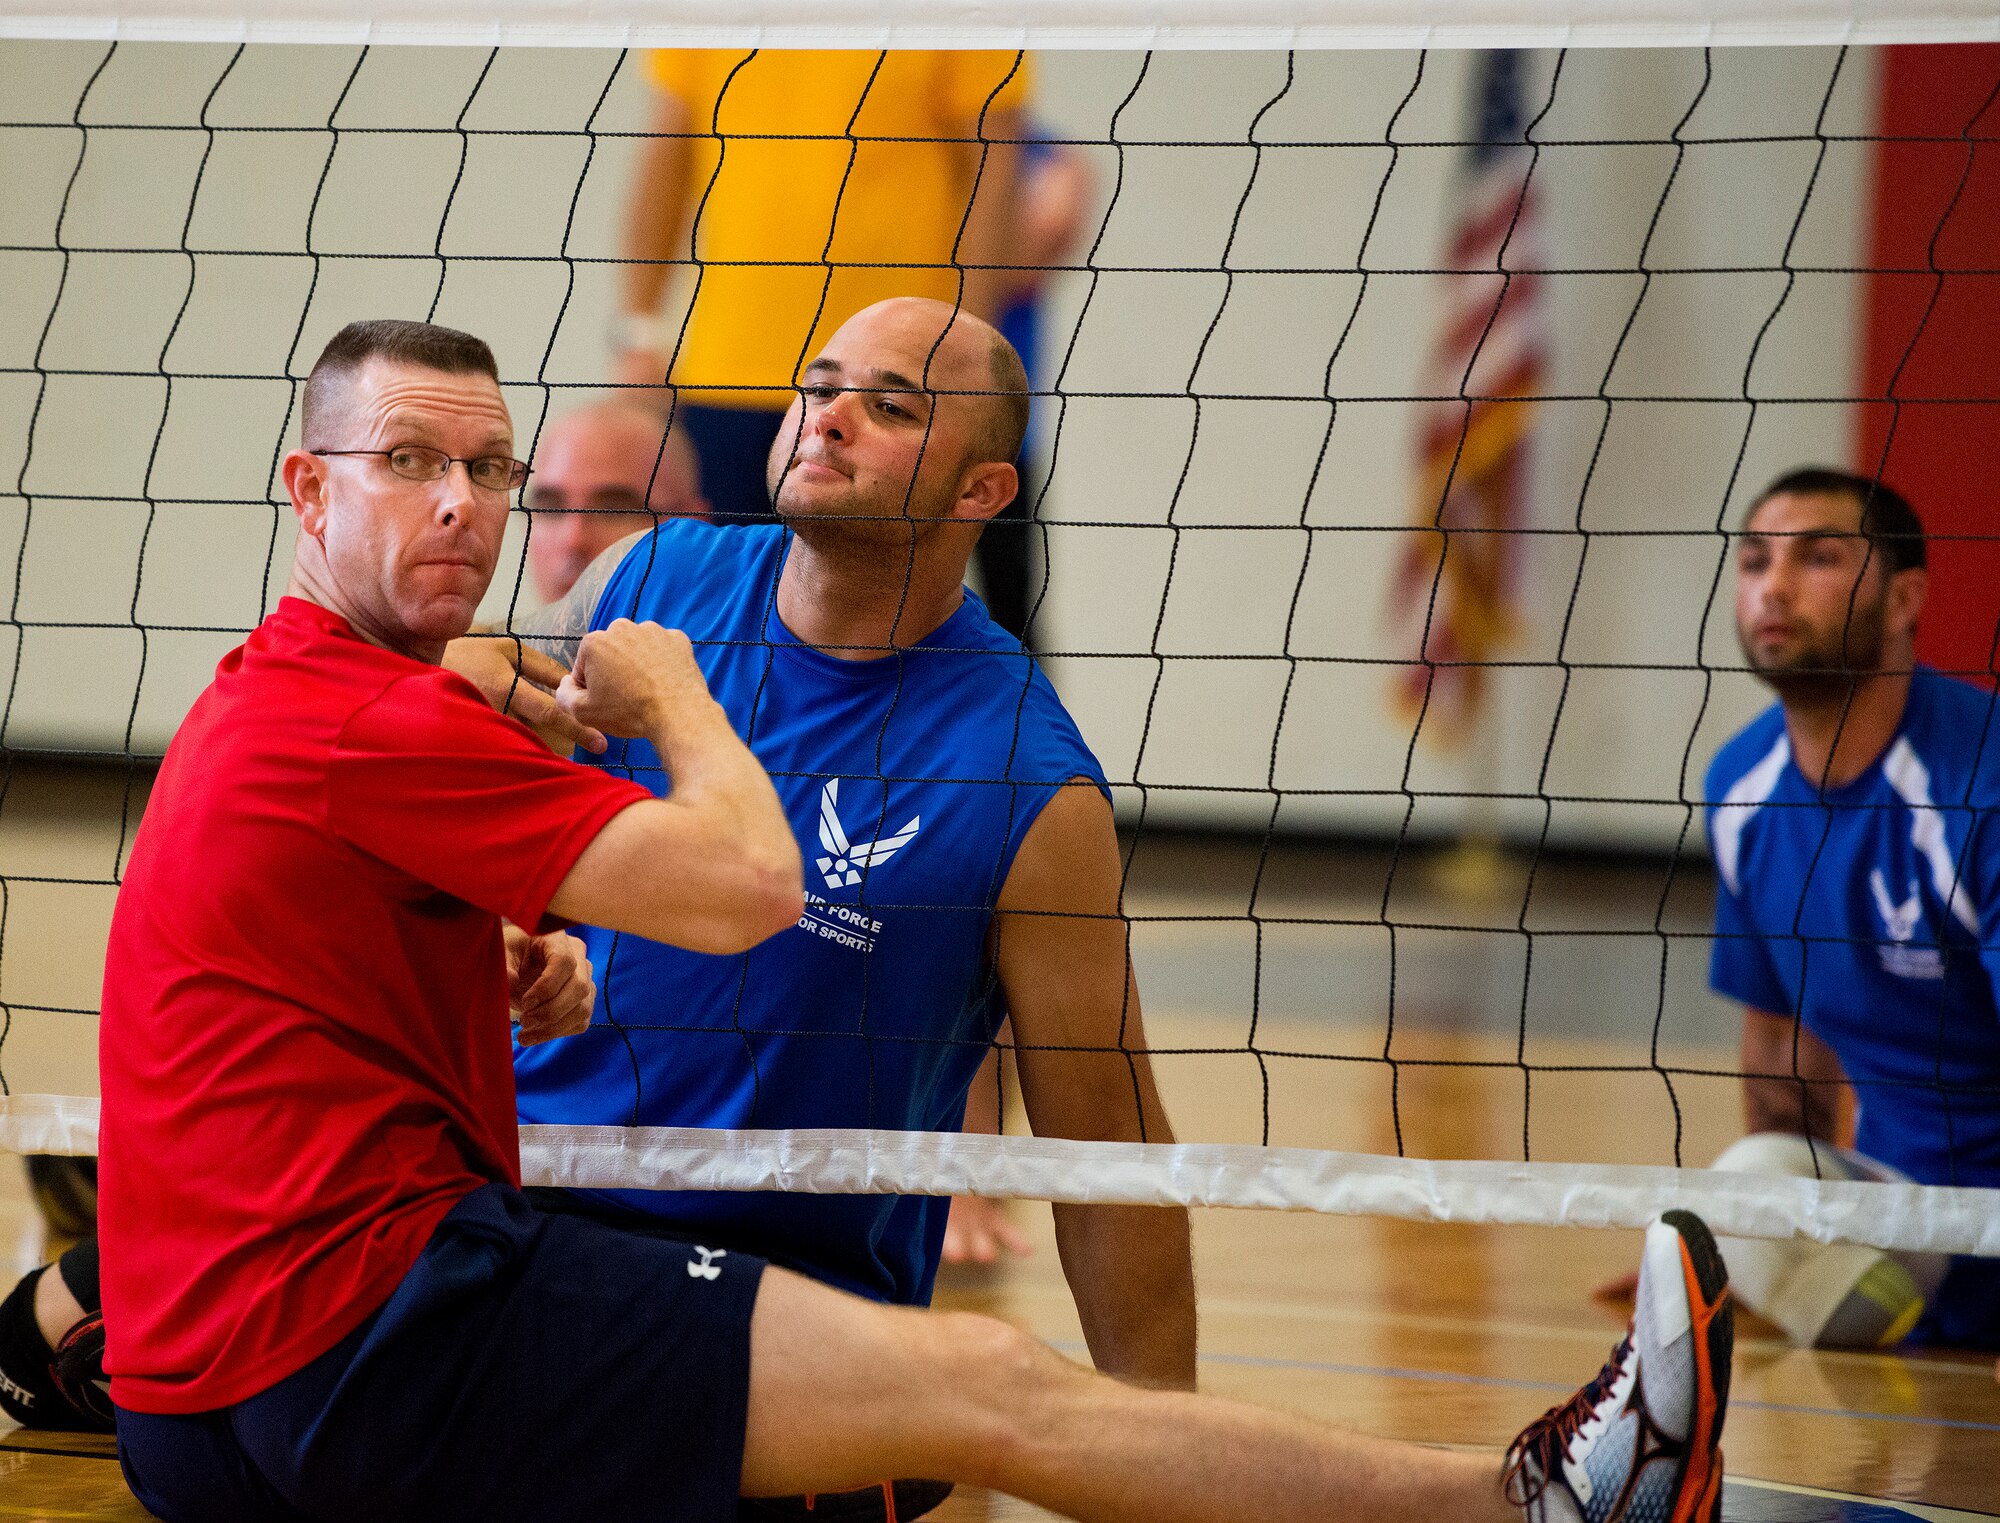 Chief Master Sgt. Brian Creager, 96th Test Wing command chief, and E.J. Newbern, an active-duty Air Force Wounded Warrior athlete, wait for the serve at a sitting volleyball game with base leadership during the final day of the Warrior Games training camp at Eglin Air Force Base, Fla., April 22. The five-day training camp for the Air Force’s athletes serves as their last practice session before the Warrior Games June 19-28. (U.S. Air Force photo/Samuel King Jr.)